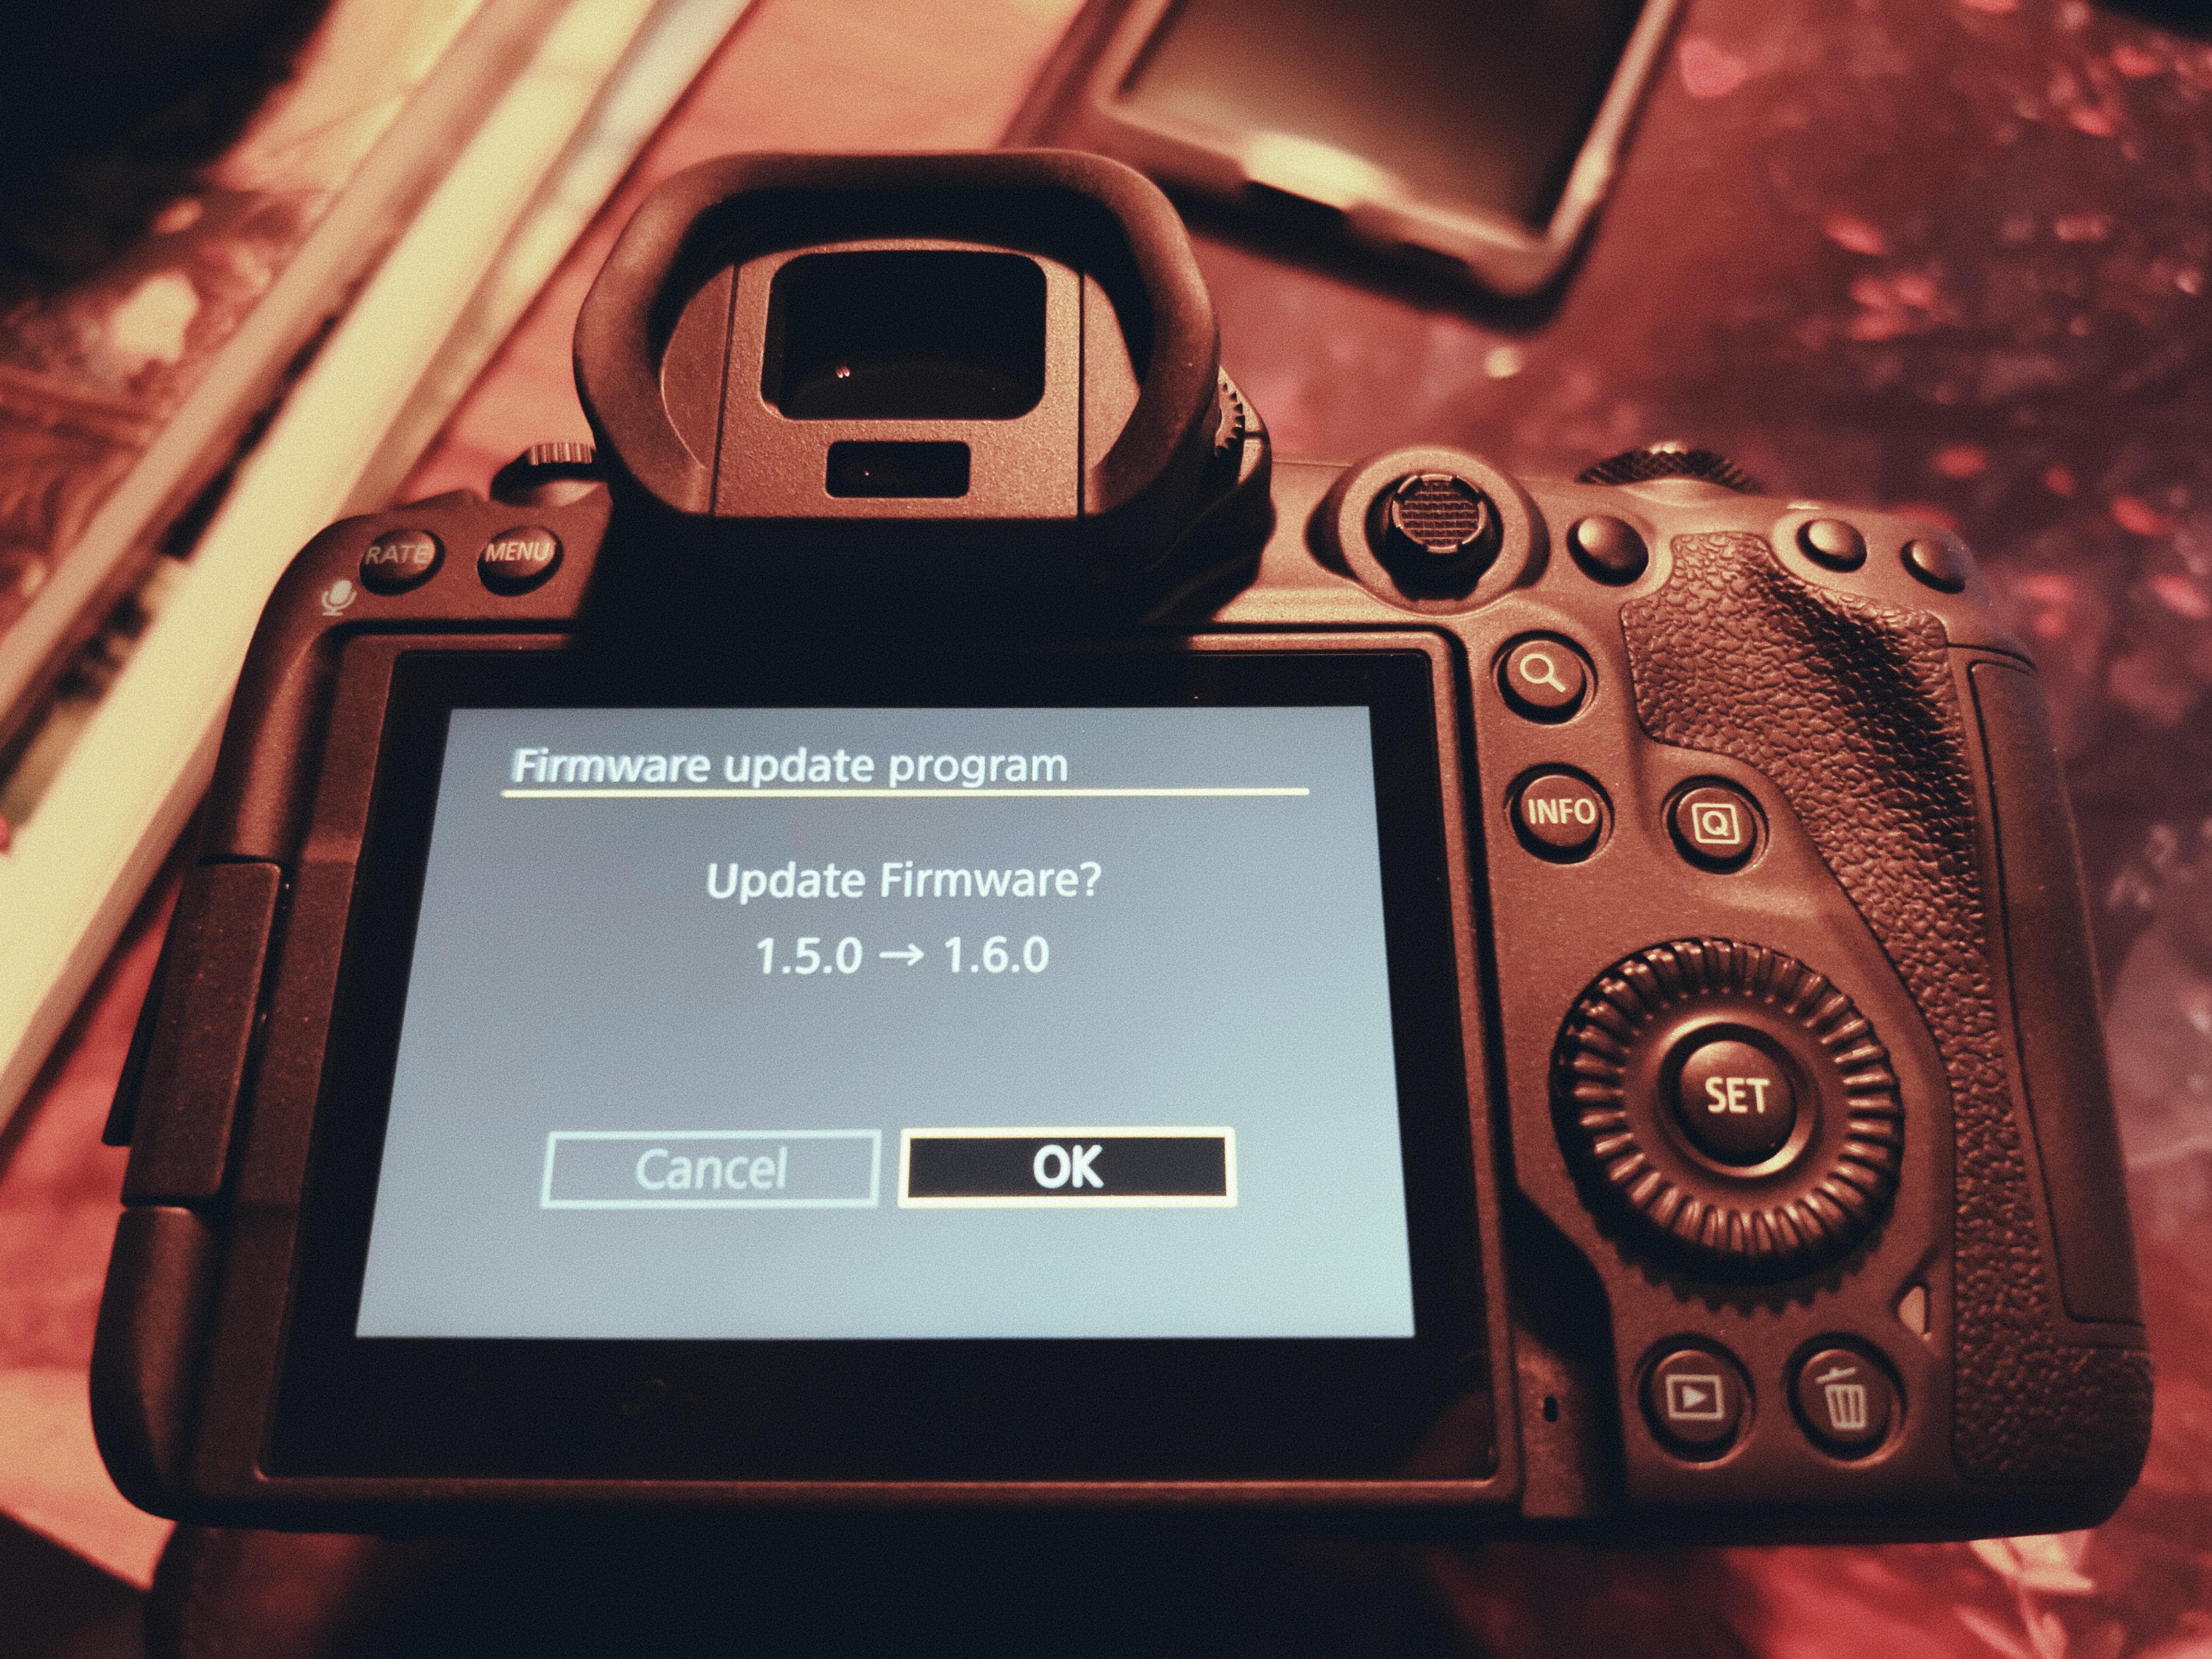 Canon EOS R5 1.6.0 firmware update